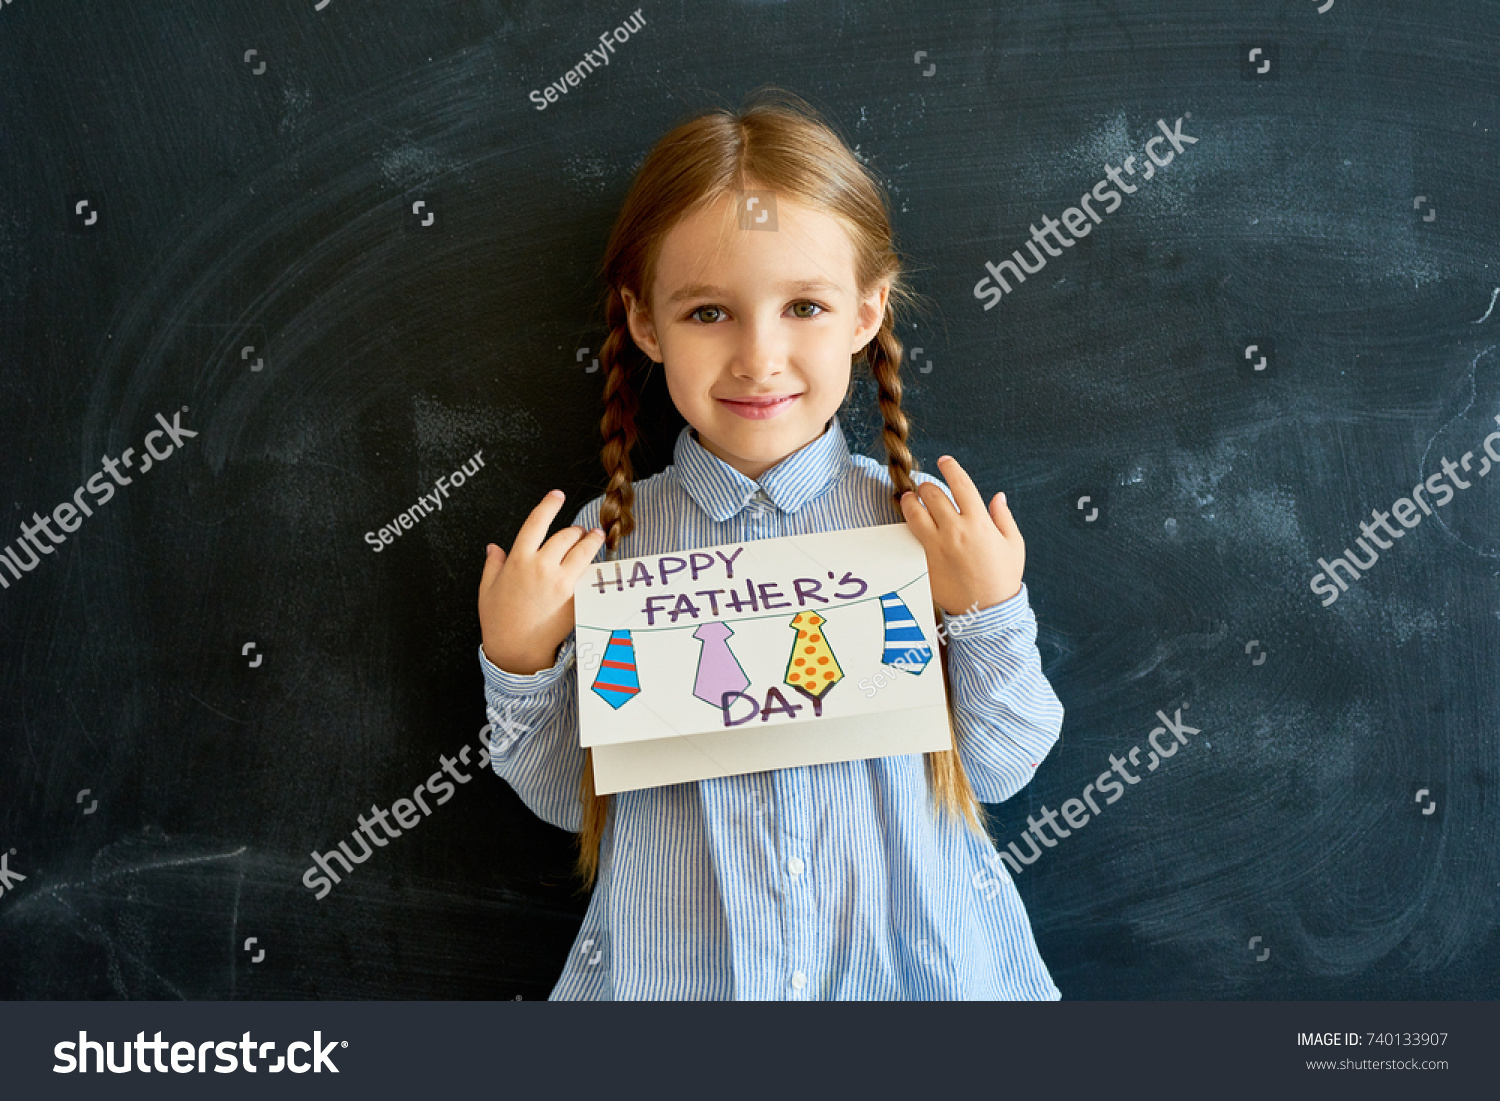 Portrait of happy little girl holding handmade  greeting card for Fathers Day posing against blackboard in school and looking at camera #740133907